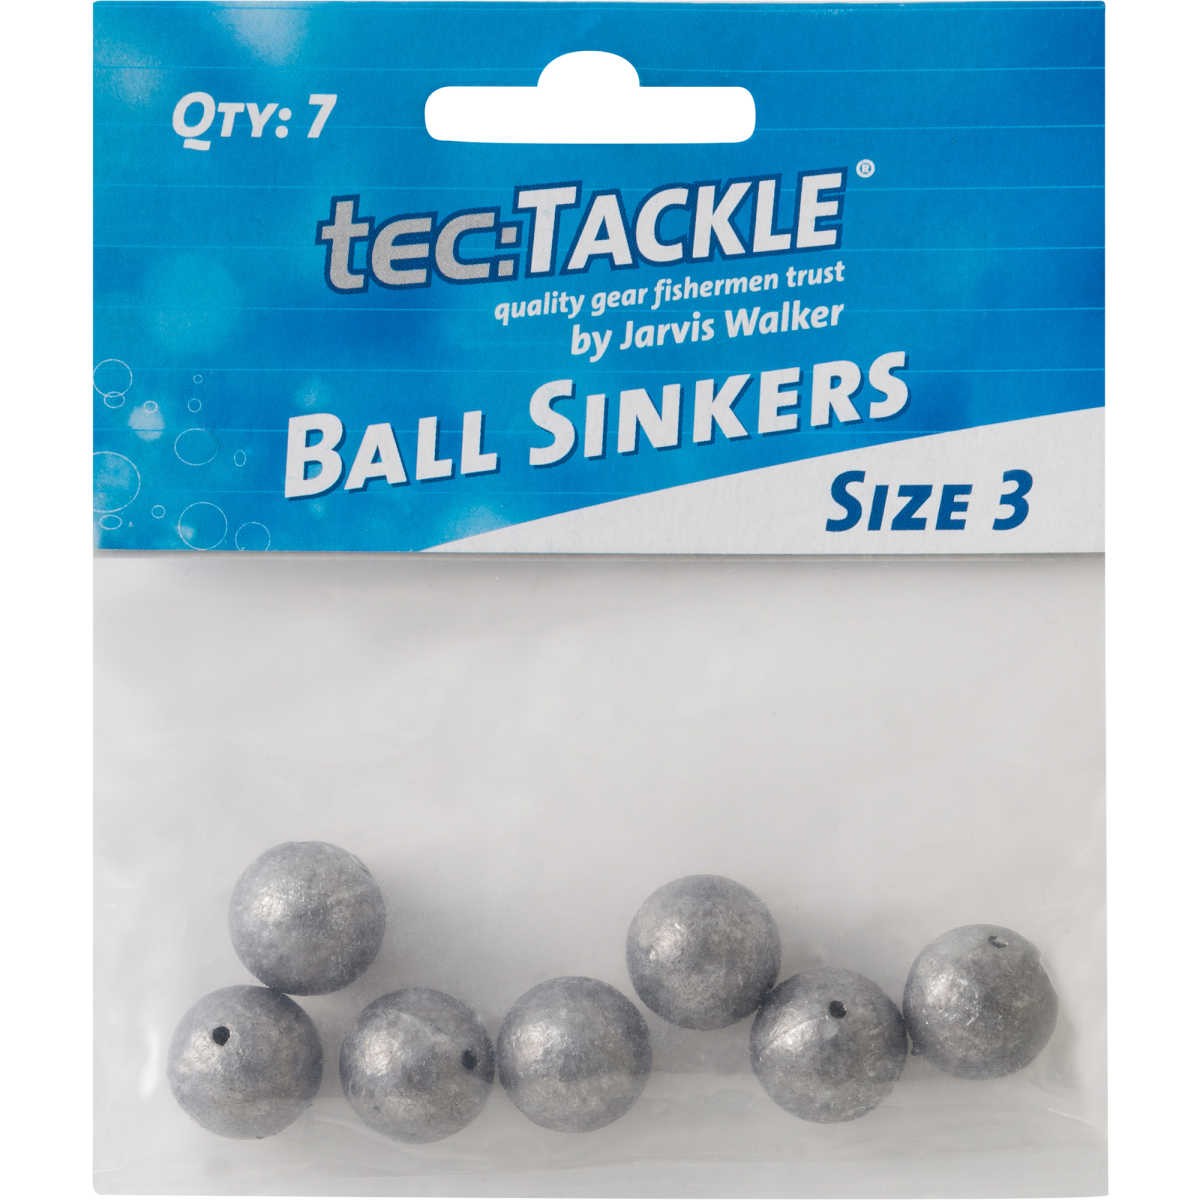 Tec:Tackle Ball Sinker Size 3 Qty 7 -  - Mansfield Hunting & Fishing - Products to prepare for Corona Virus